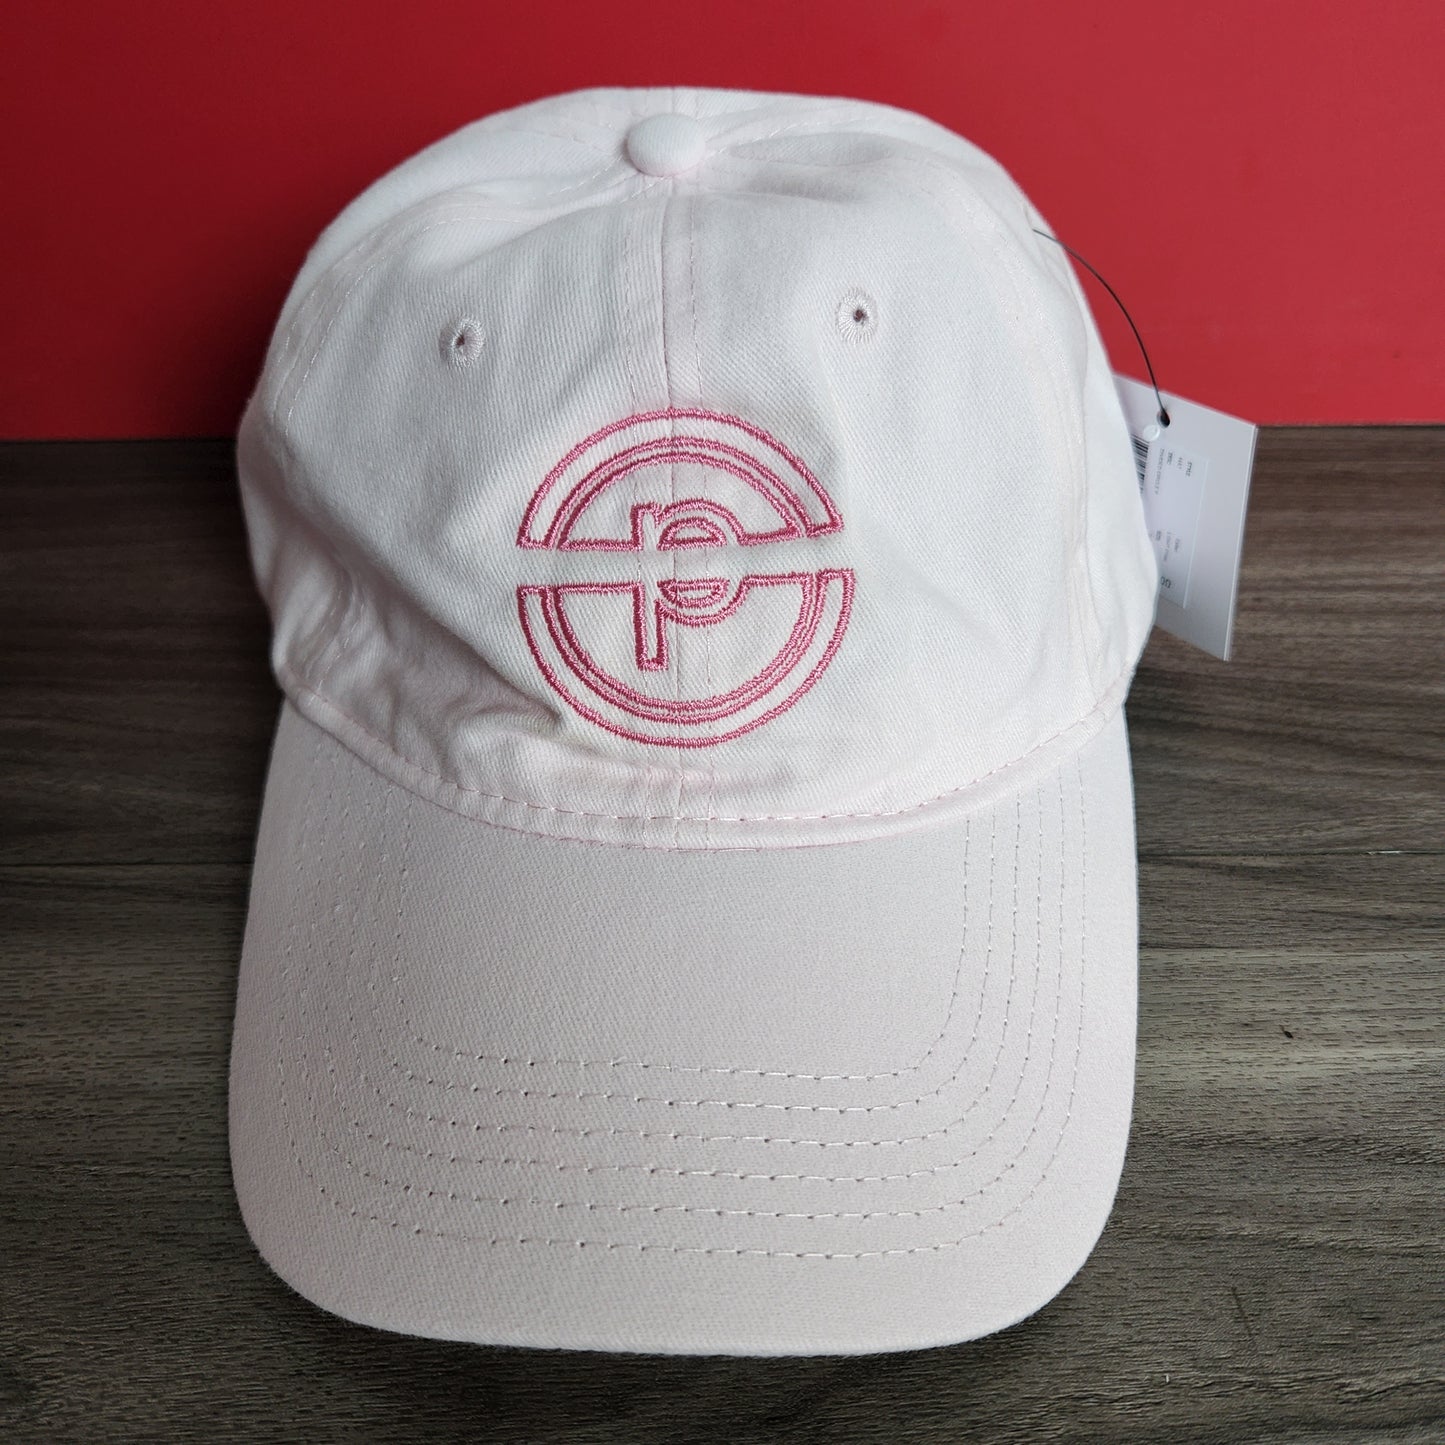 Pure Barre Divided Cap- Pink